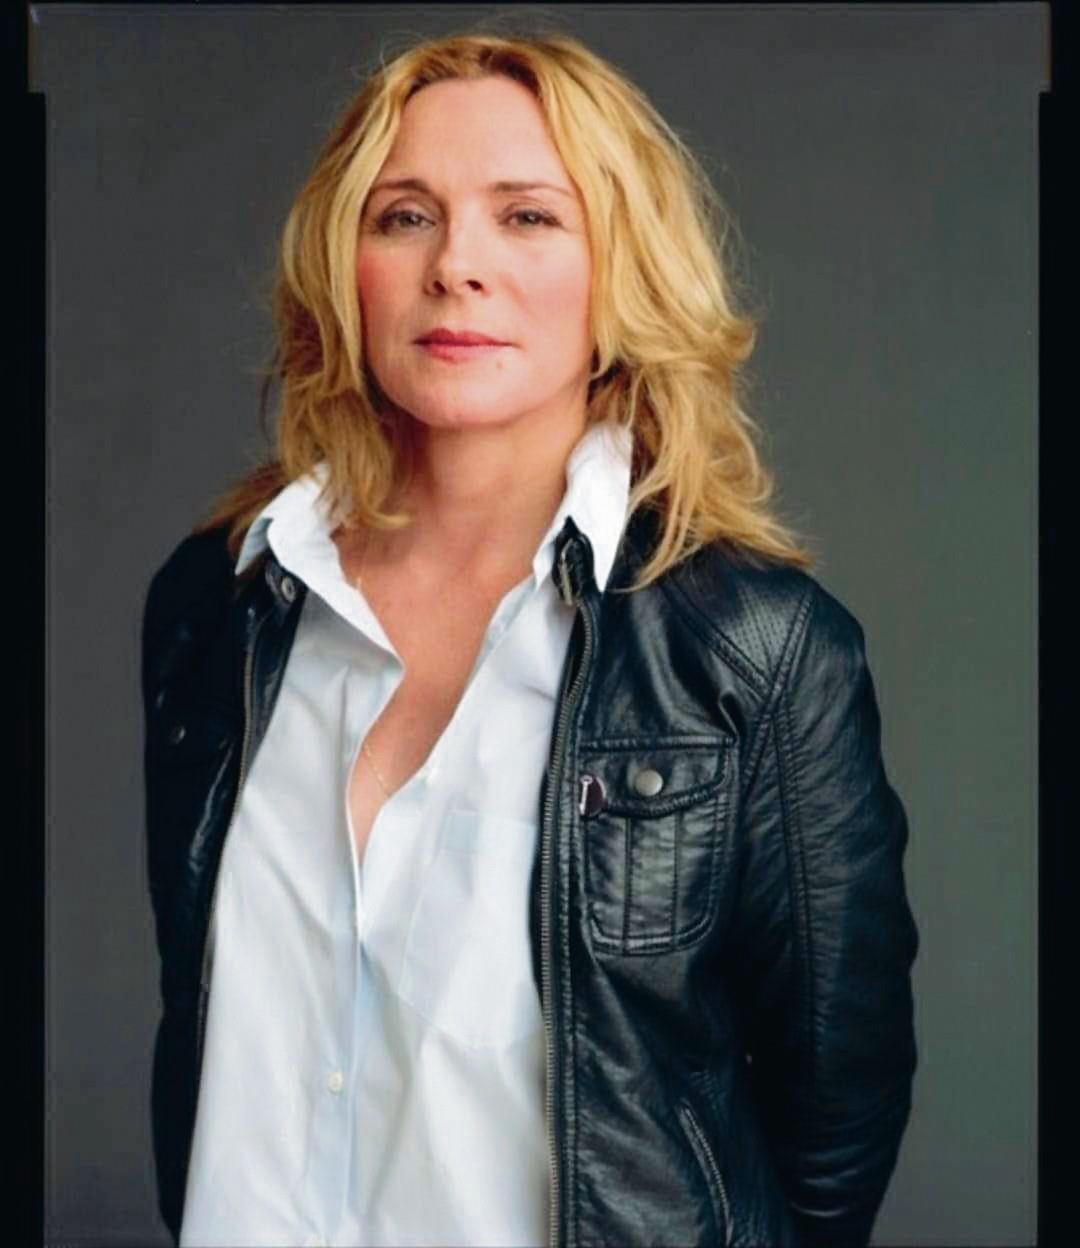 About My Father features Kim Cattrall